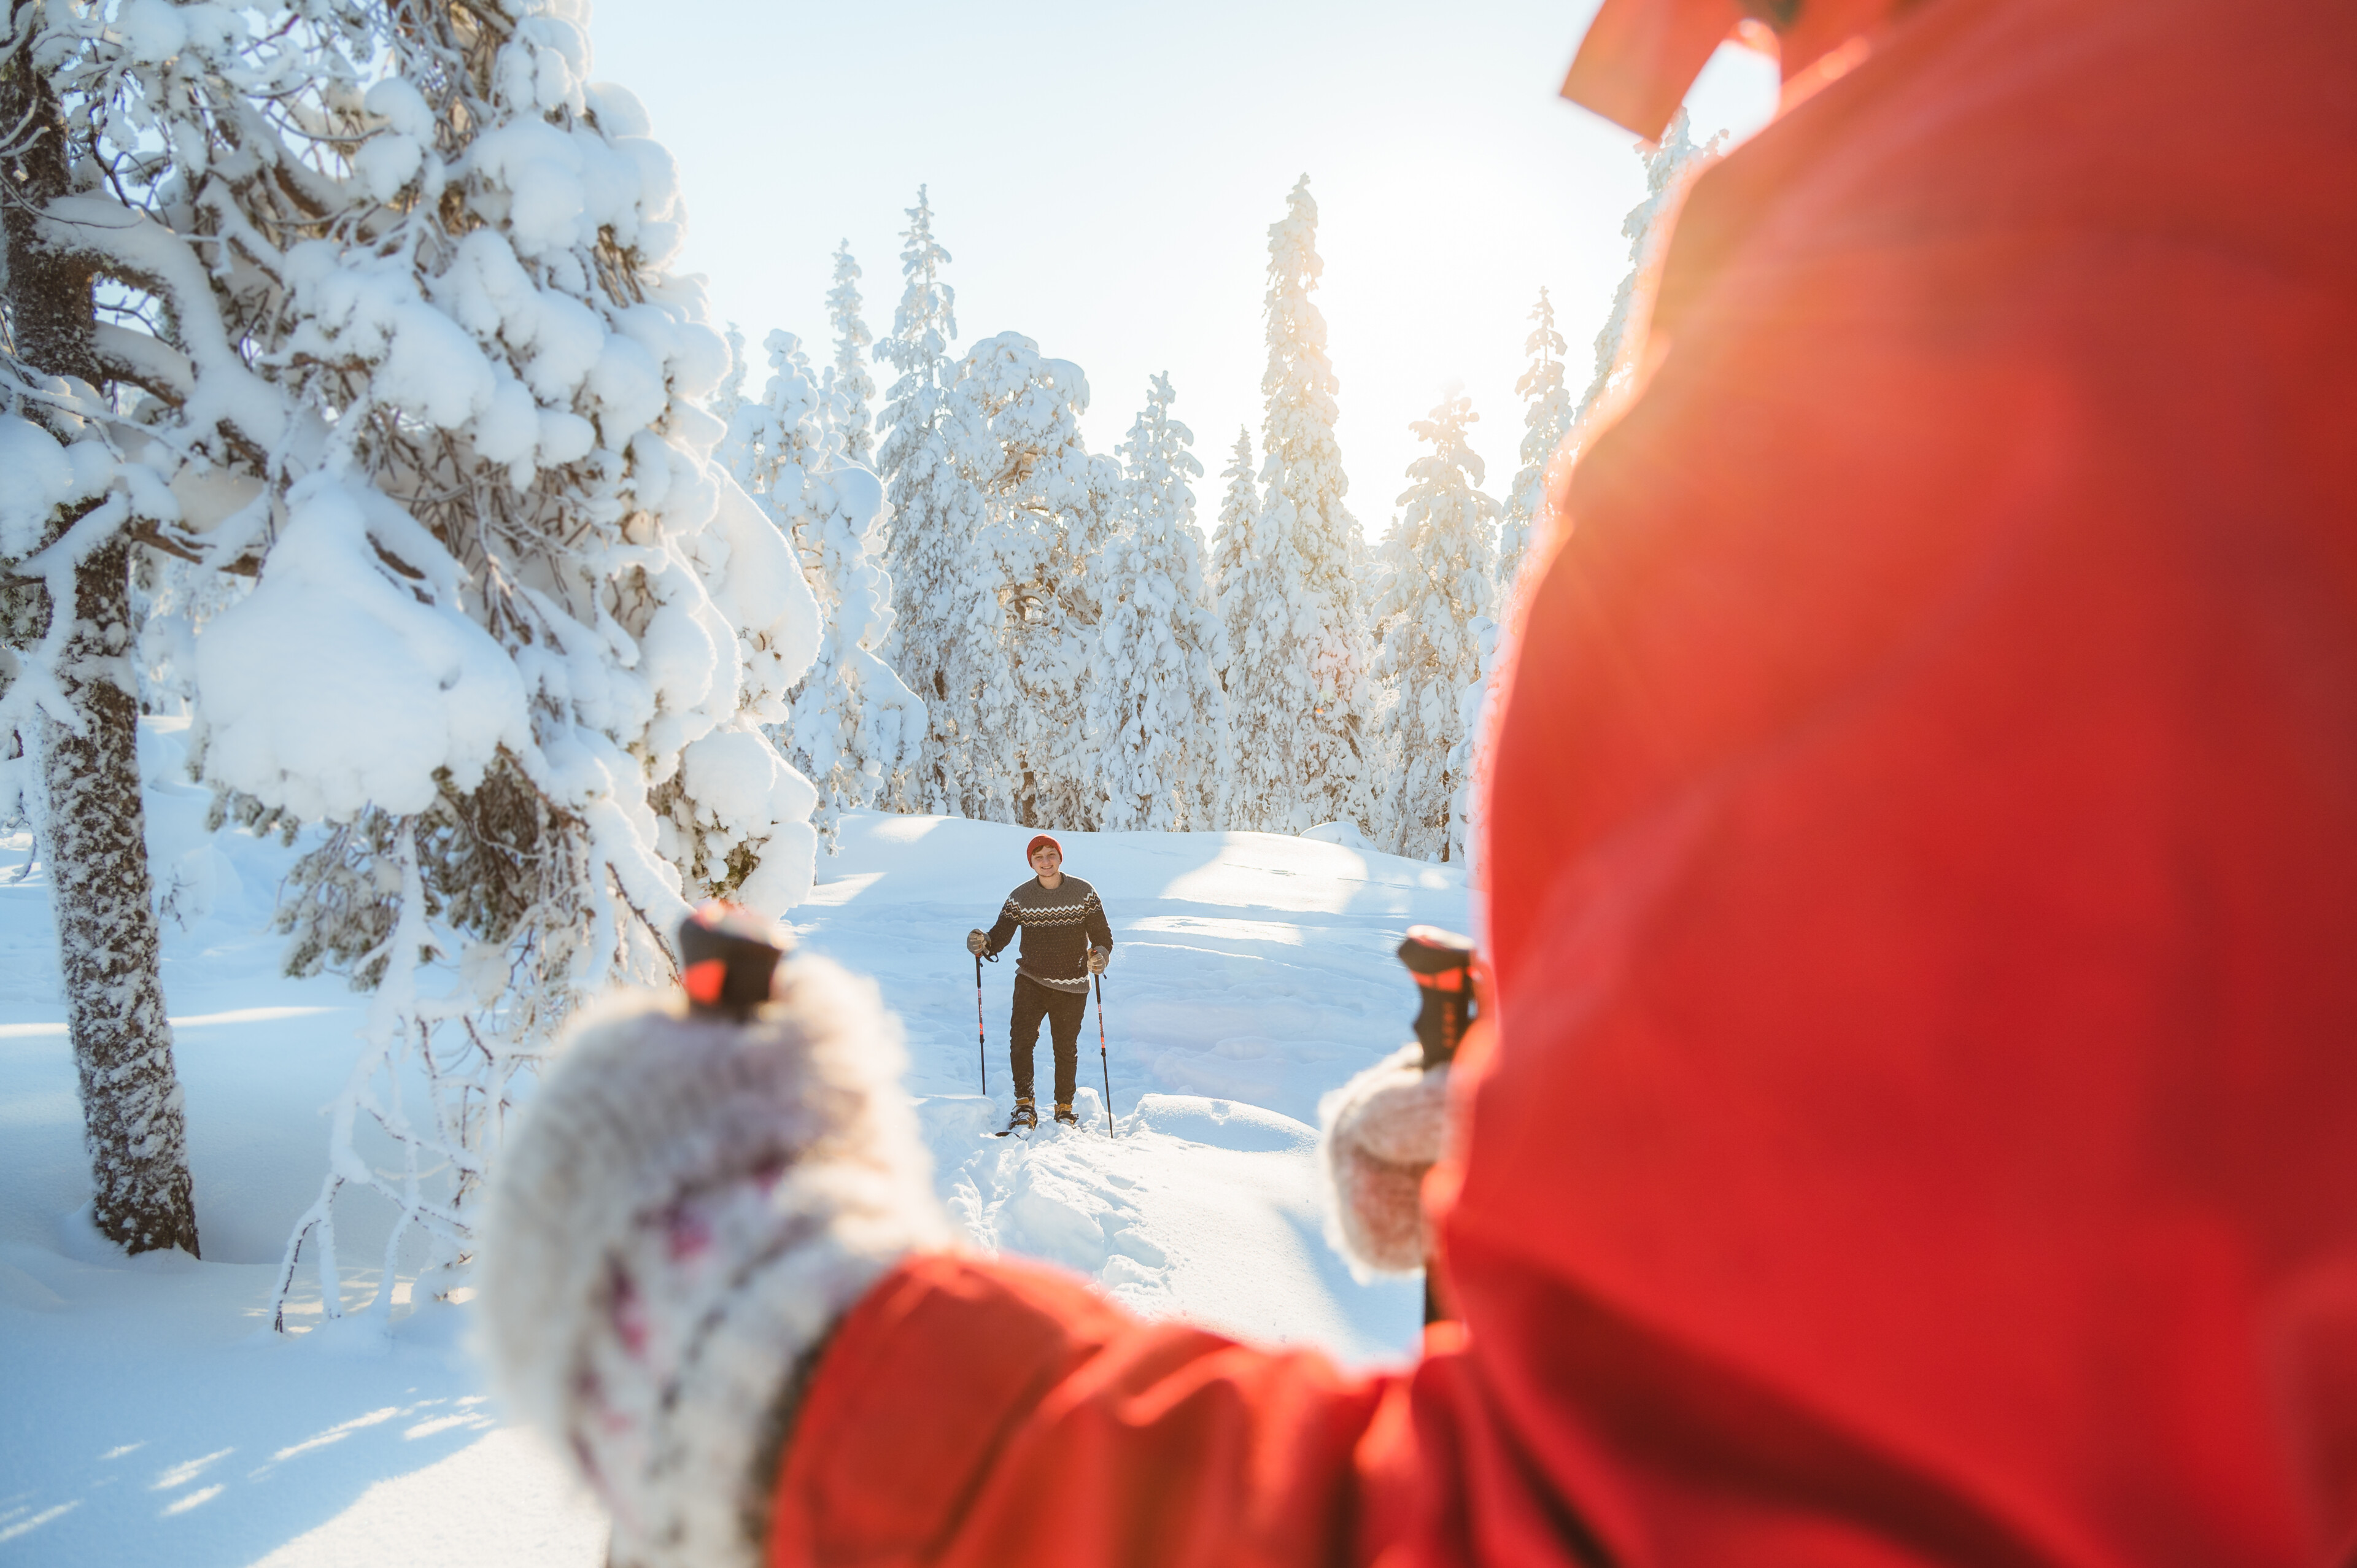 People enjoying winter, snow and sunshine with snowshoes in Rovaniemi, Lapland, Finland.